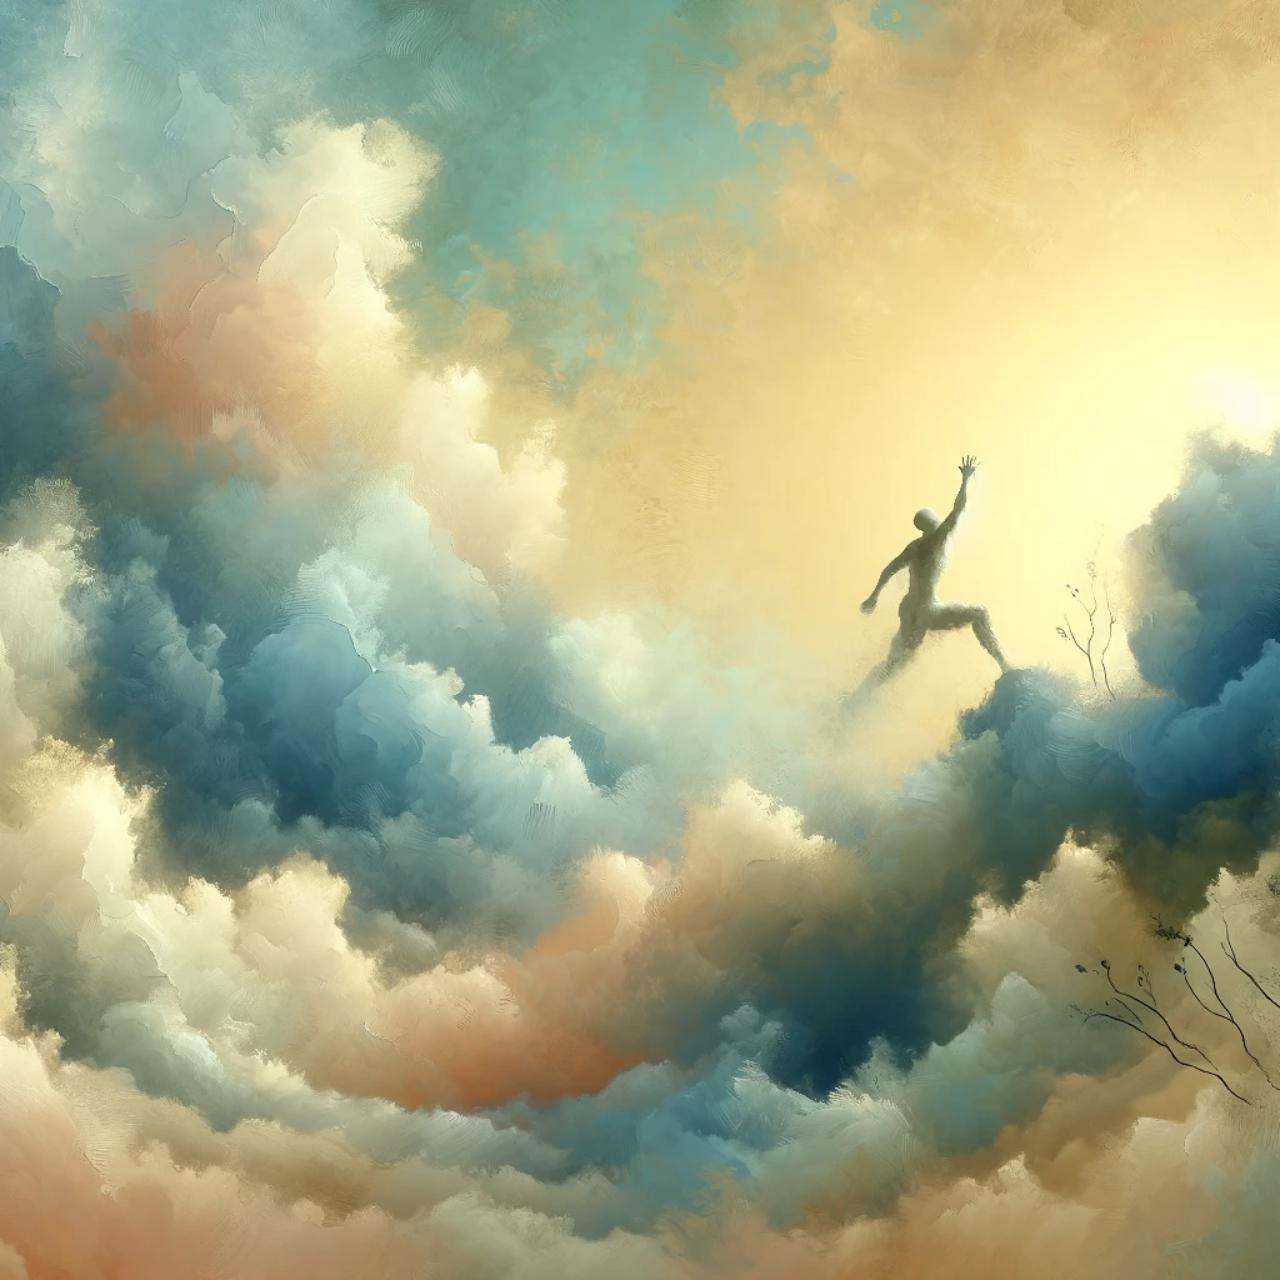 This image features a figure overcoming an obstacle or rising from a challenge, representing the theme of resilience. It is designed with soft, natural colors, creating a serene yet empowering atmosphere.